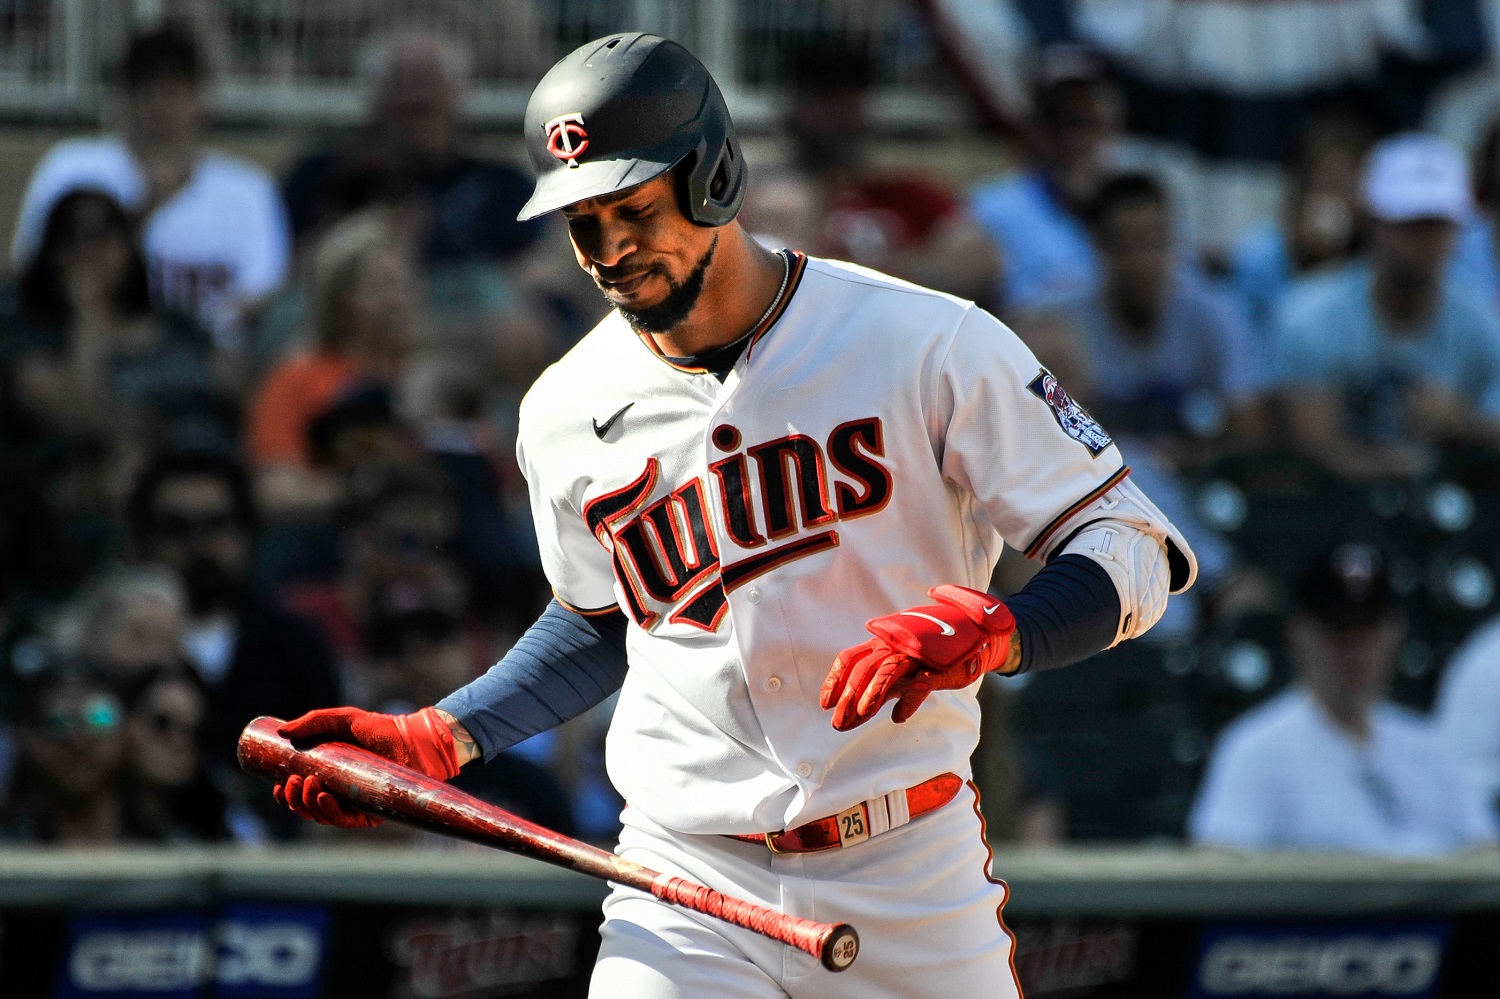 MLB on FOX - WHAT A GAME for Minnesota Twins OF Byron Buxton